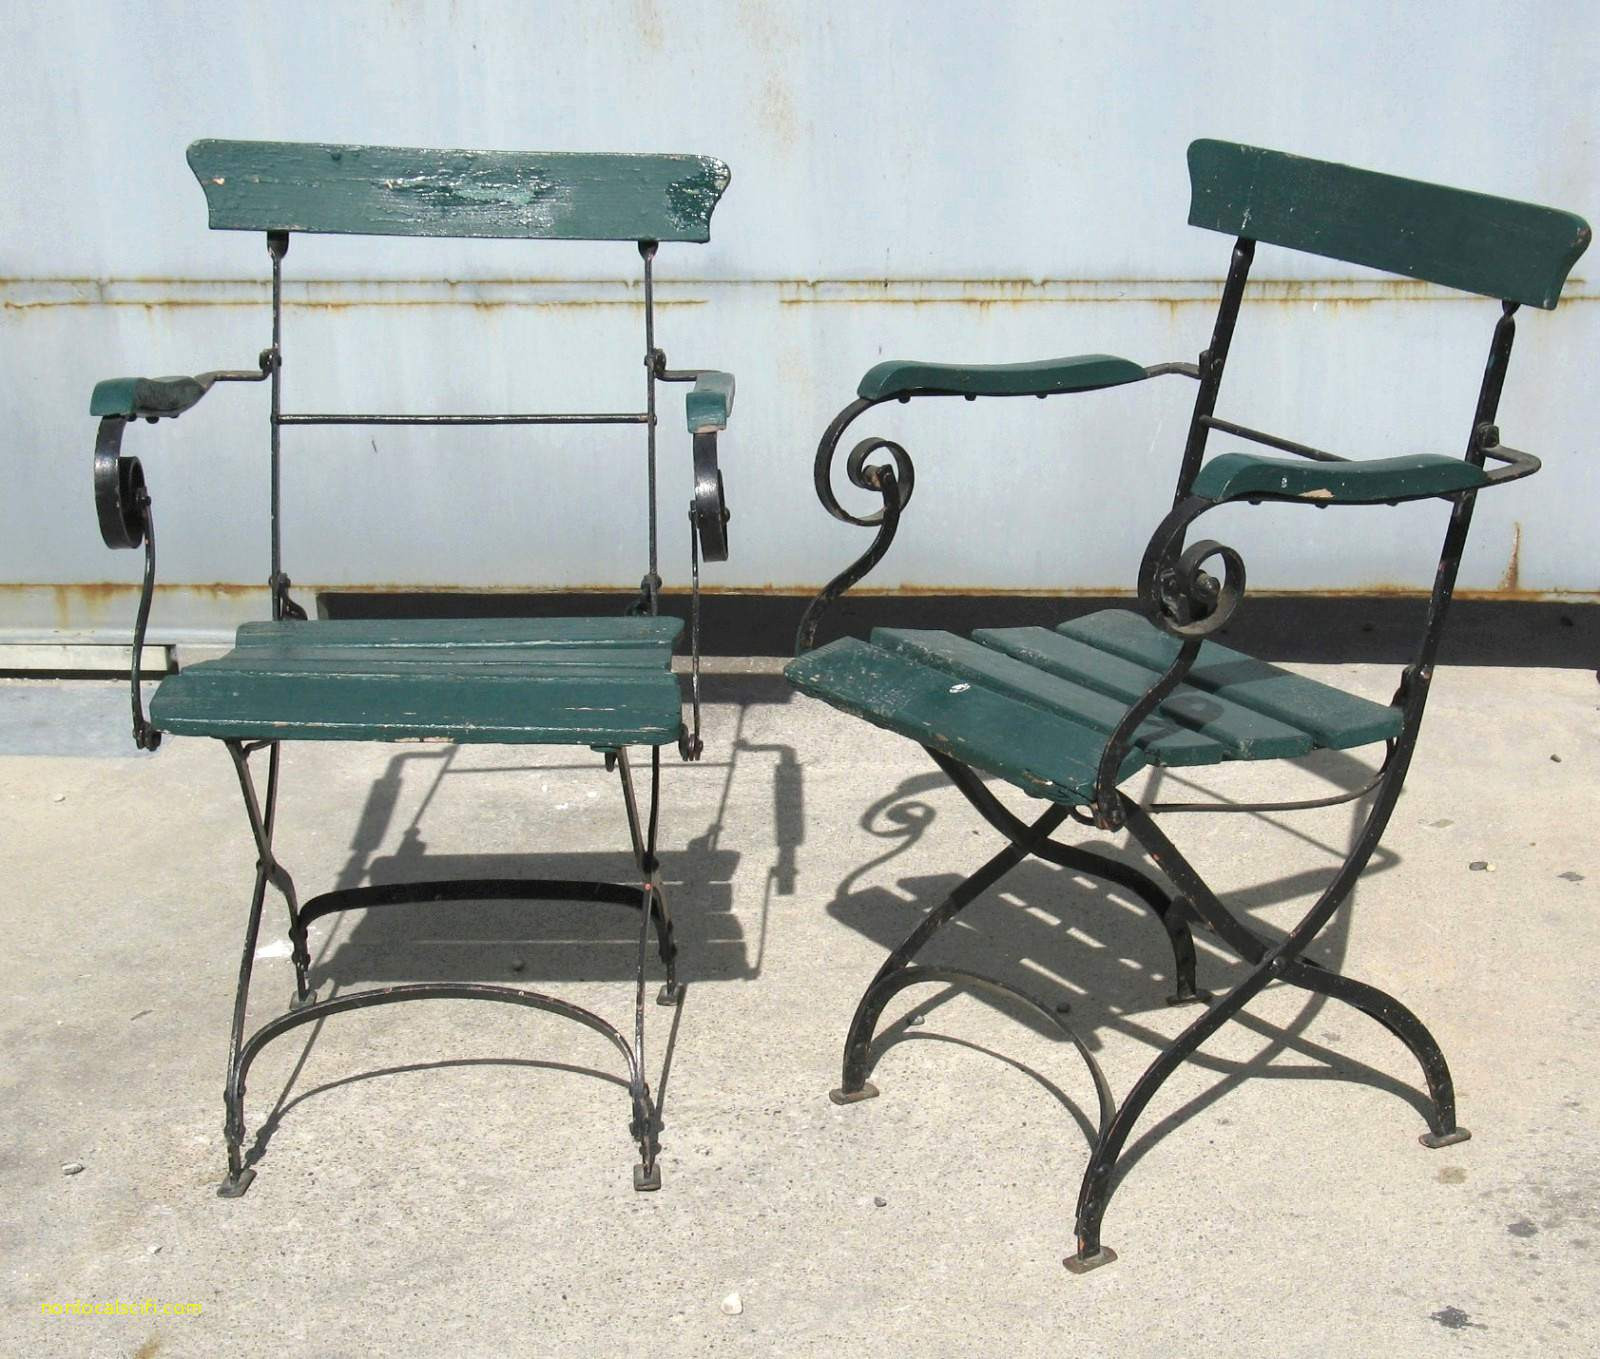 table de jardin ronde metal chaise metalique table basse metal ronde chaise coquille 0d archives of table de jardin ronde metal